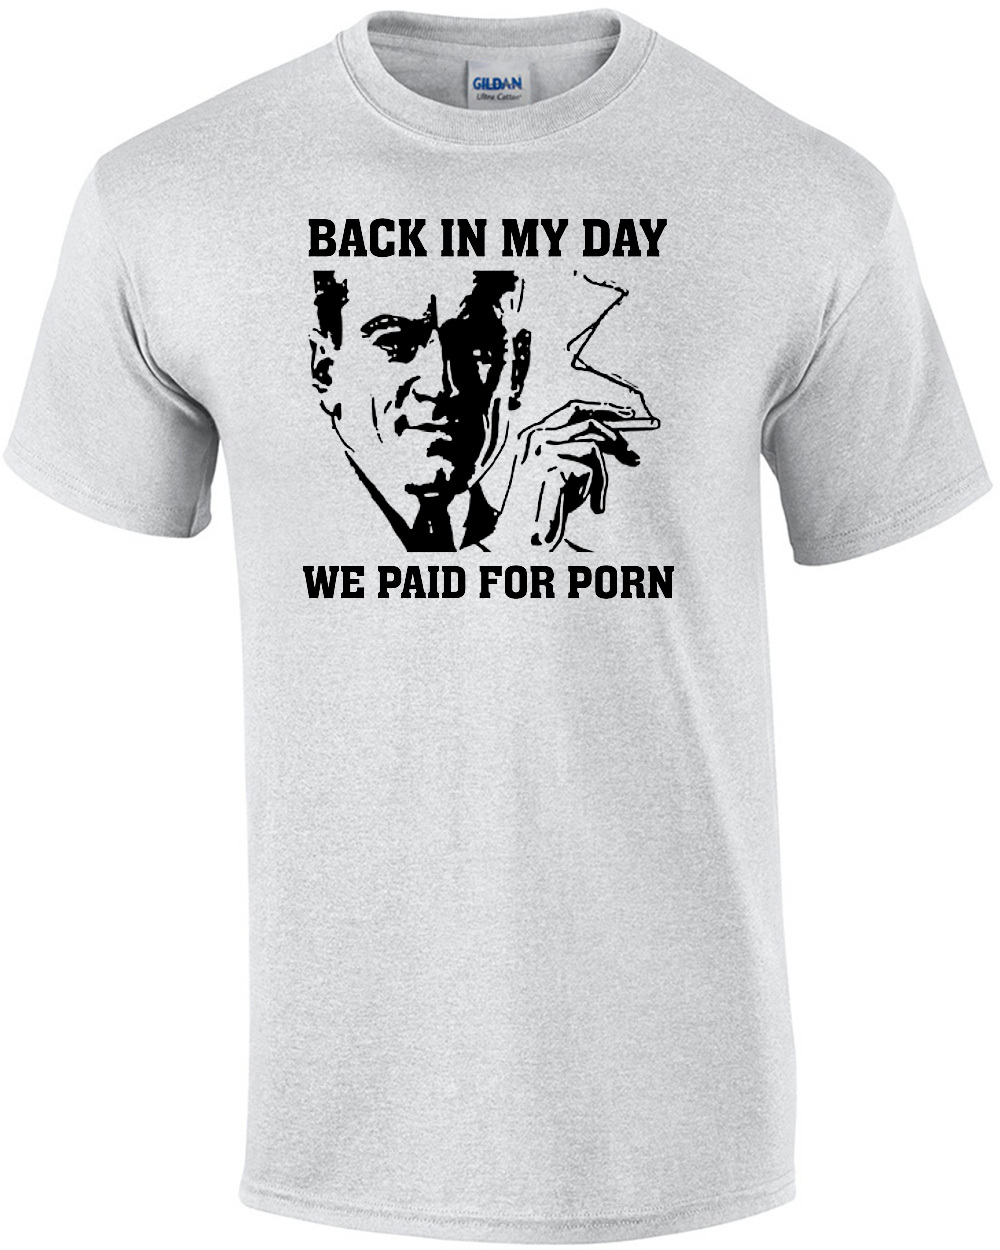 Back in my day - we paid for porn - vintage retro sexual funny t-shirt